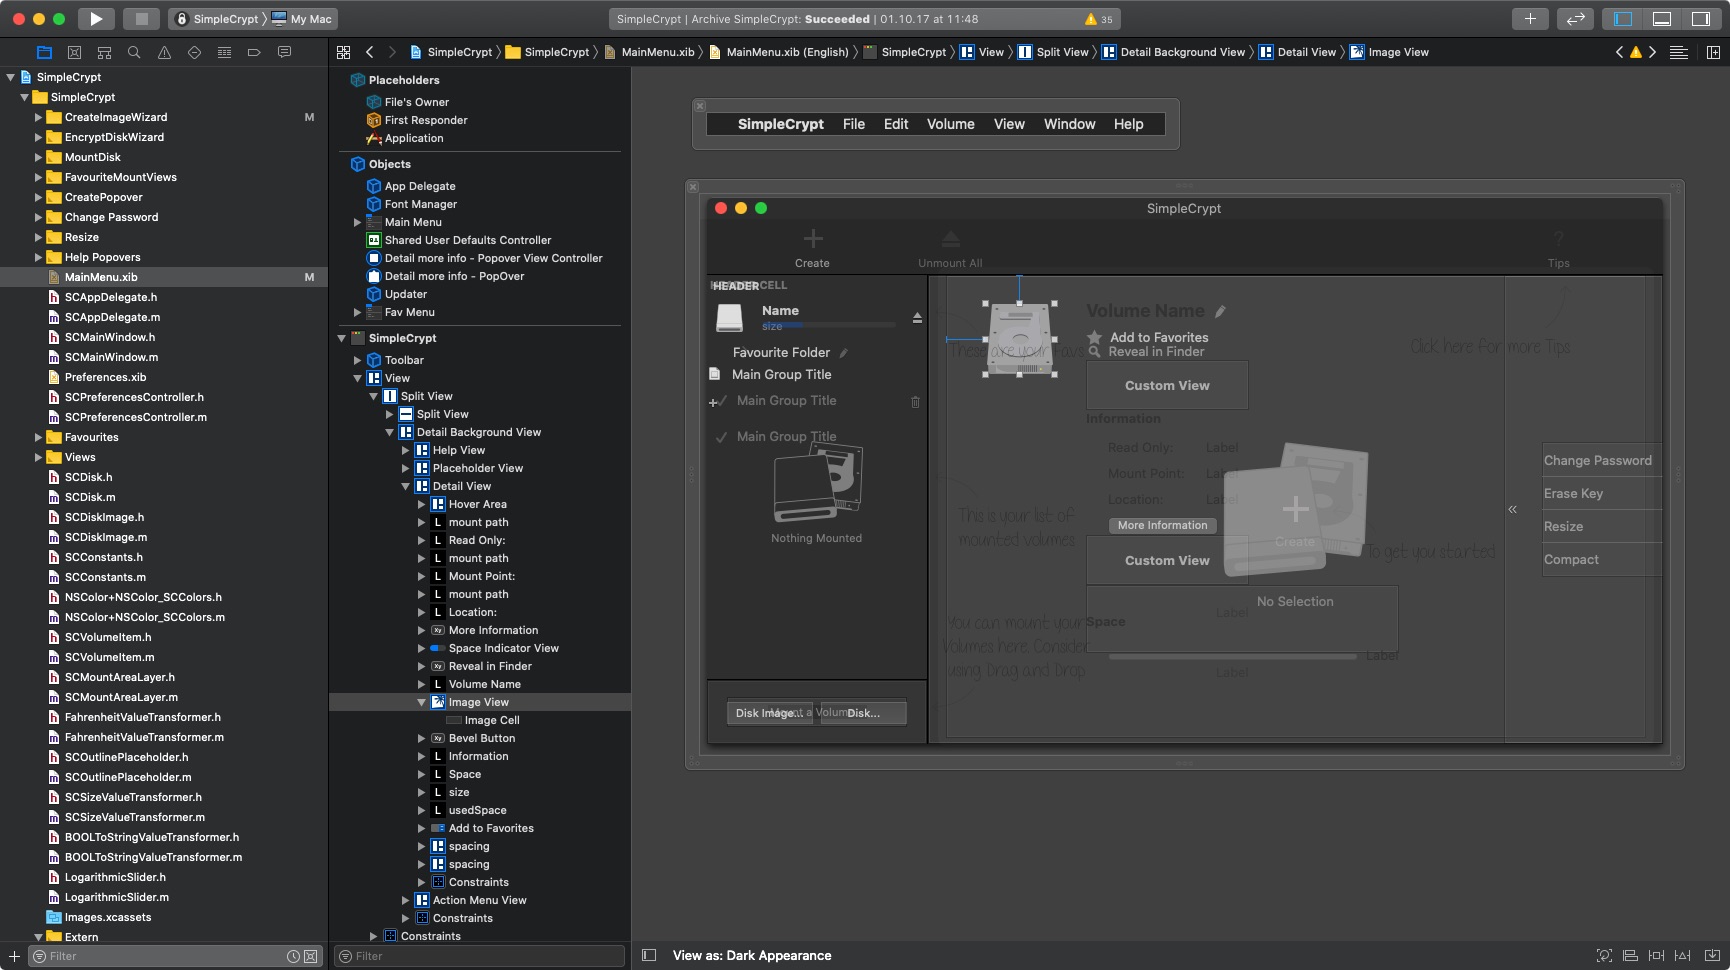 Screenshot of the SimpleCrypt application being developed in Xcode, the macOS native development environment.